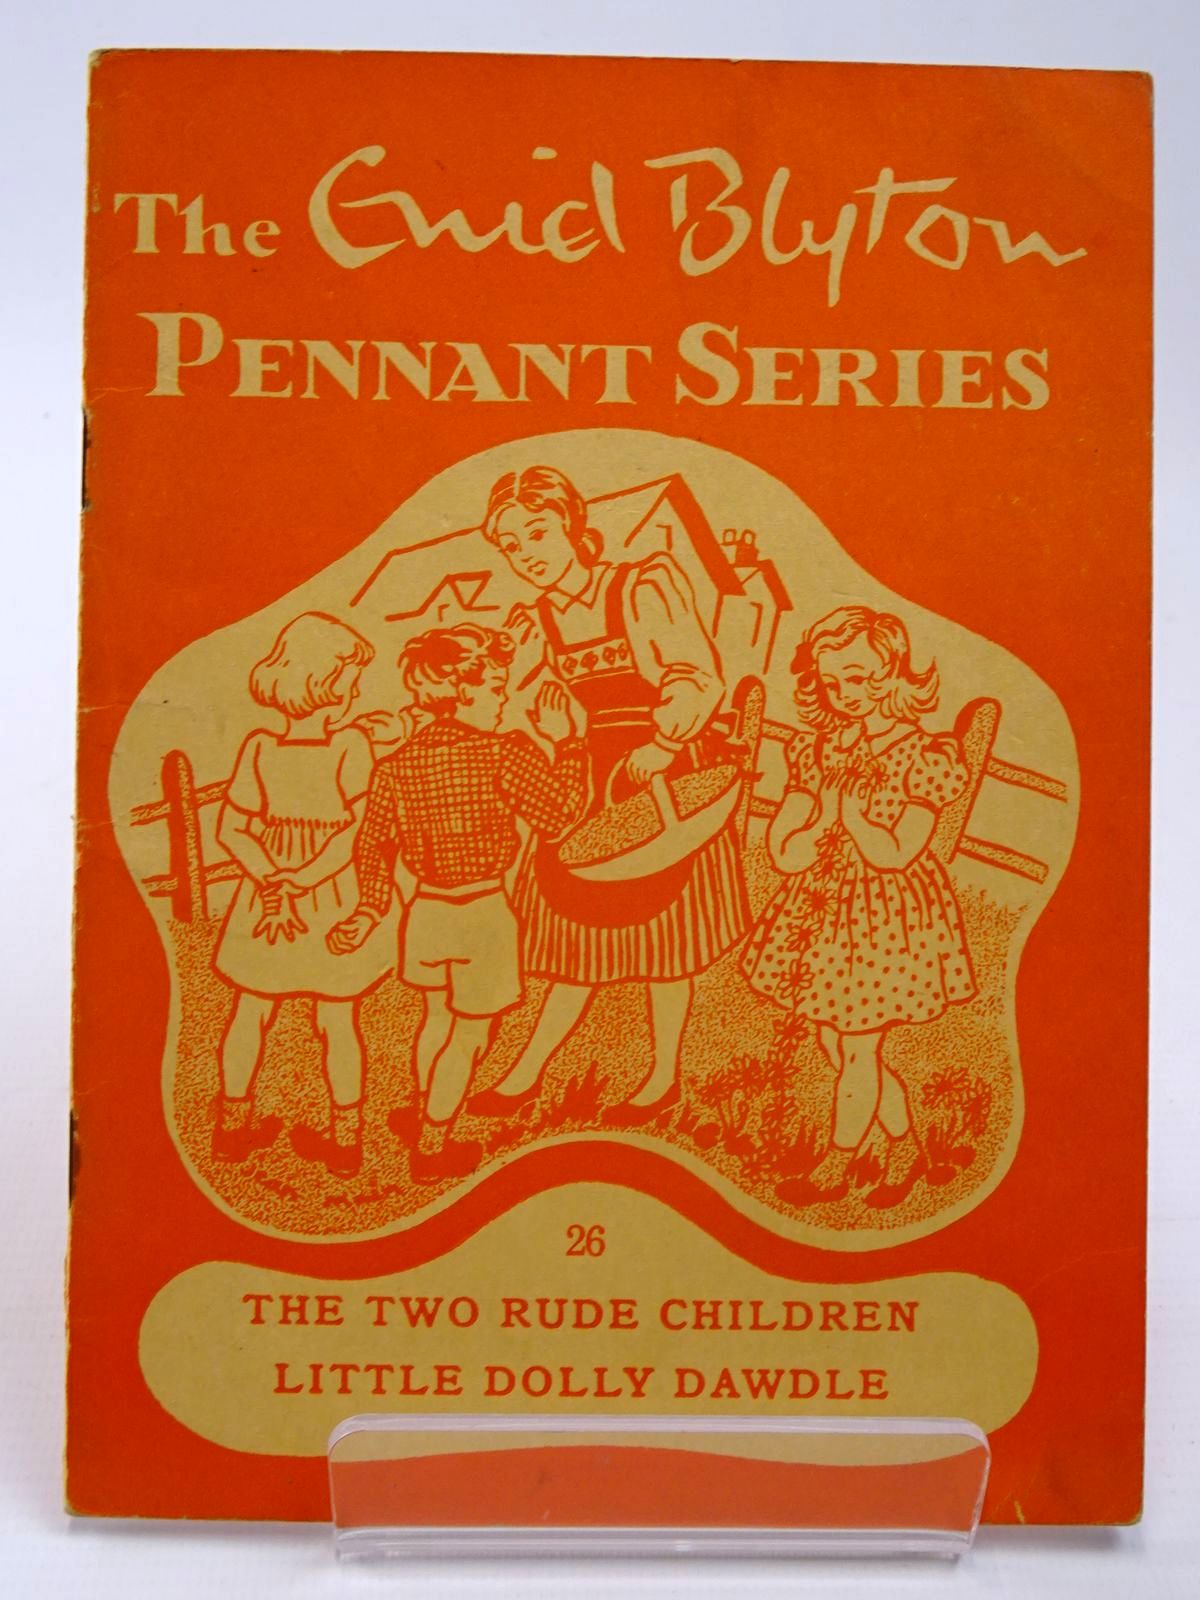 Photo of THE ENID BLYTON PENNANT SERIES No. 26 THE TWO RUDE CHILDREN / LITTLE DOLLY DAWDLE written by Blyton, Enid illustrated by Soper, Eileen
Main, Jean published by Macmillan & Co. Ltd. (STOCK CODE: 2130515)  for sale by Stella & Rose's Books